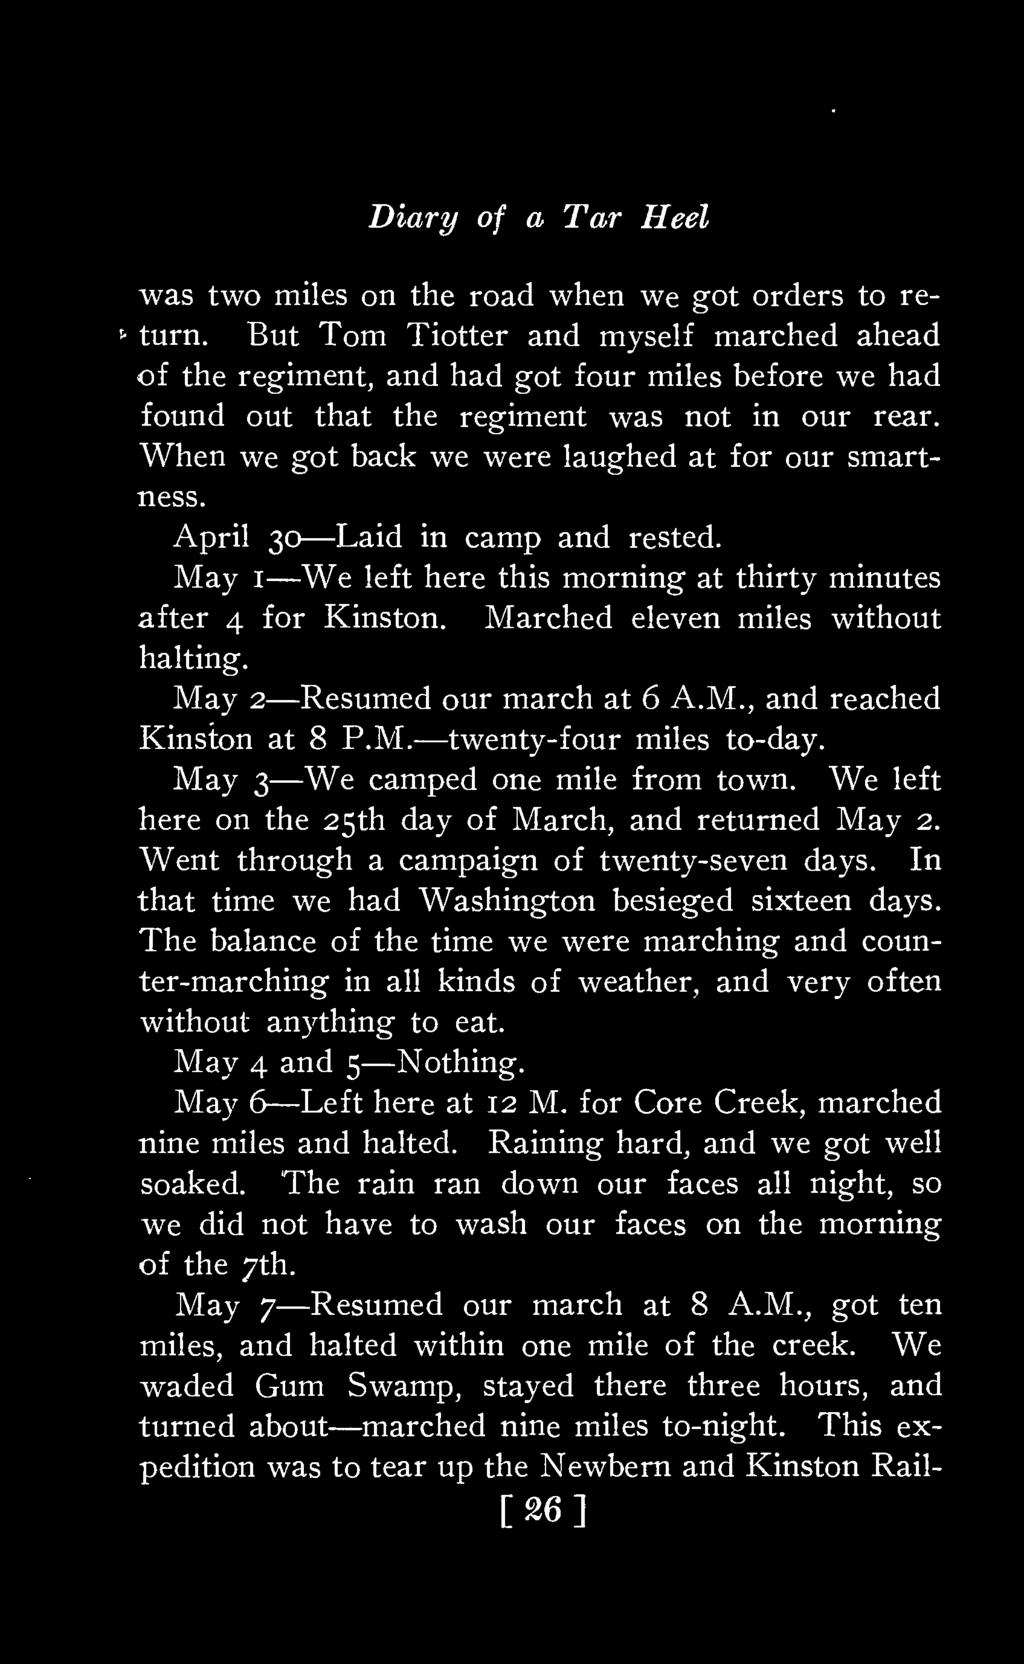 April 30 Laid in camp and rested. May 1 We left here this morning at thirty minutes after 4 for Kinston. Marched eleven miles without halting. May 2 Resumed our march at 6 A.M., and reached Kinston at 8 P.